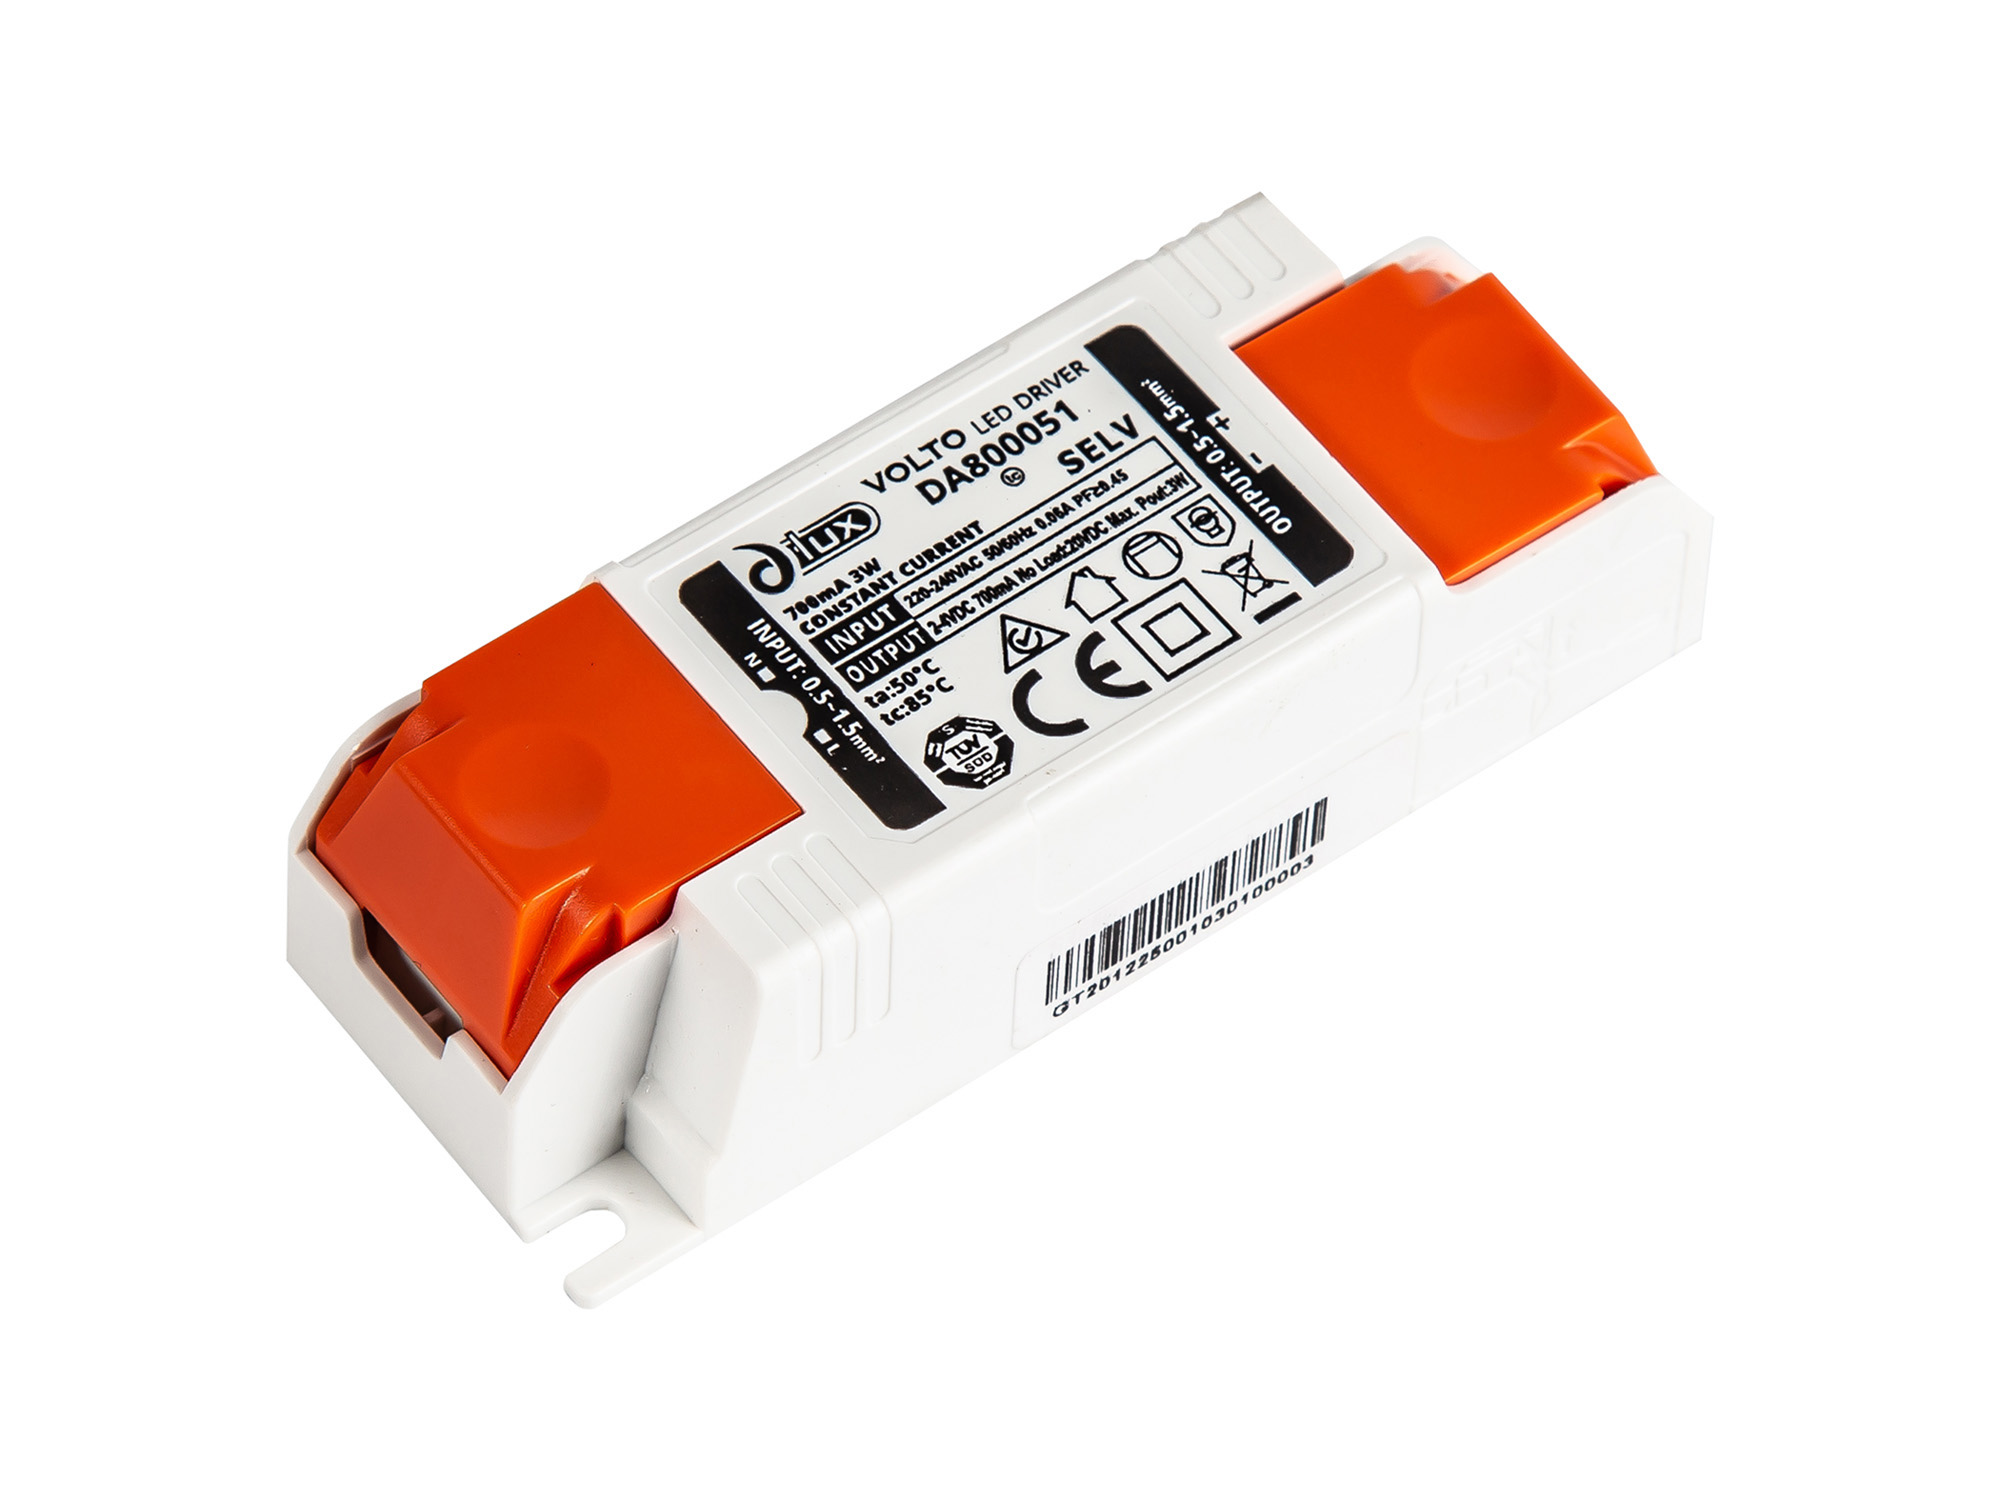 DA800051  Volto; 3W Constant Current 700mA Non-Dimmable LED Driver 2-4V Push-Fit terminal IP20